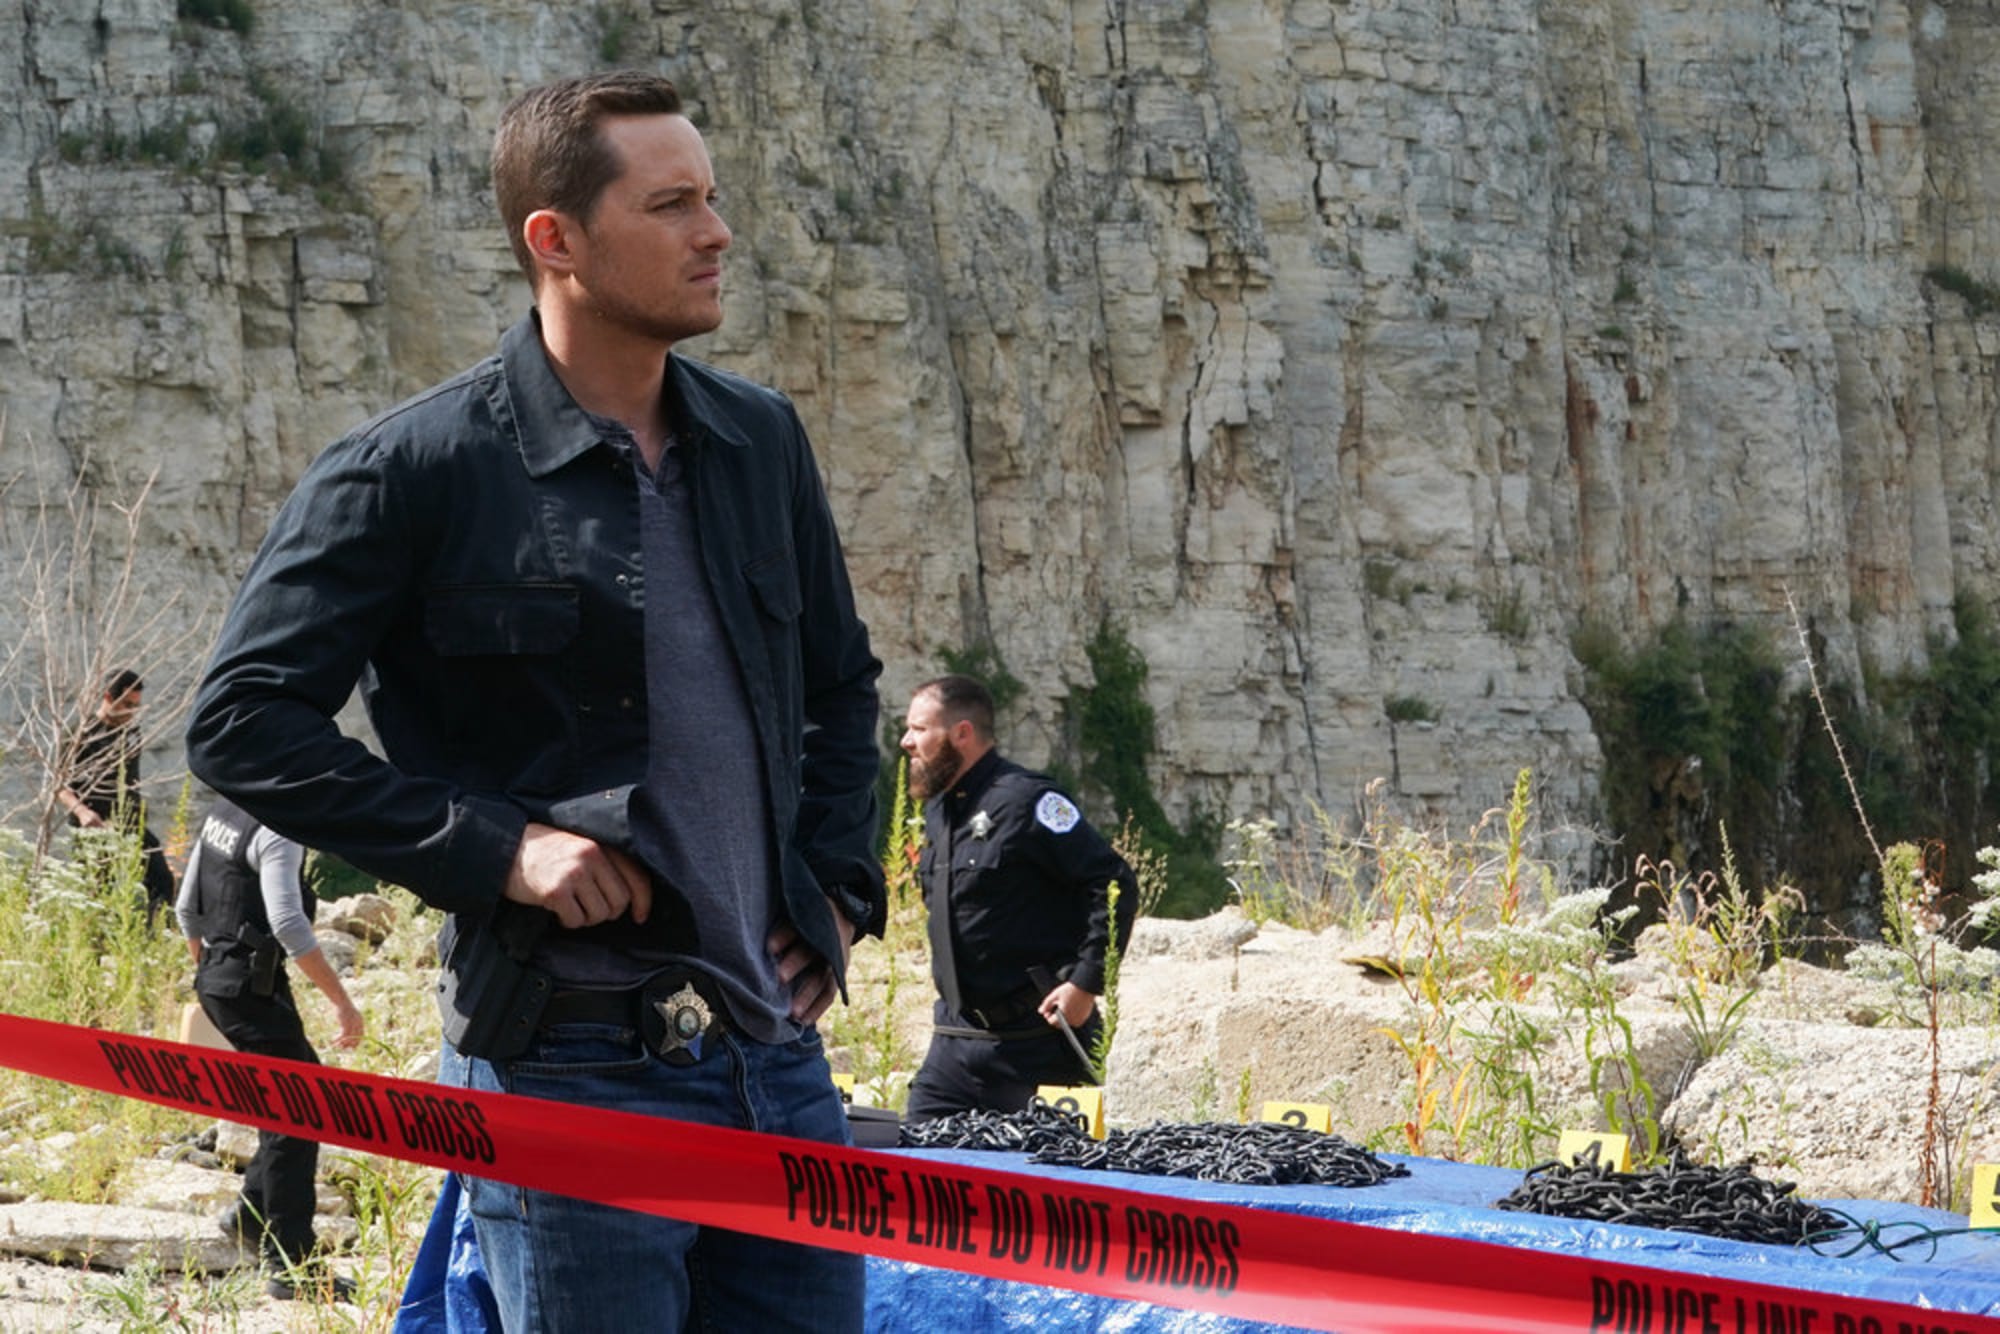 Chicago PD cast: How tall is Jesse Lee Soffer?